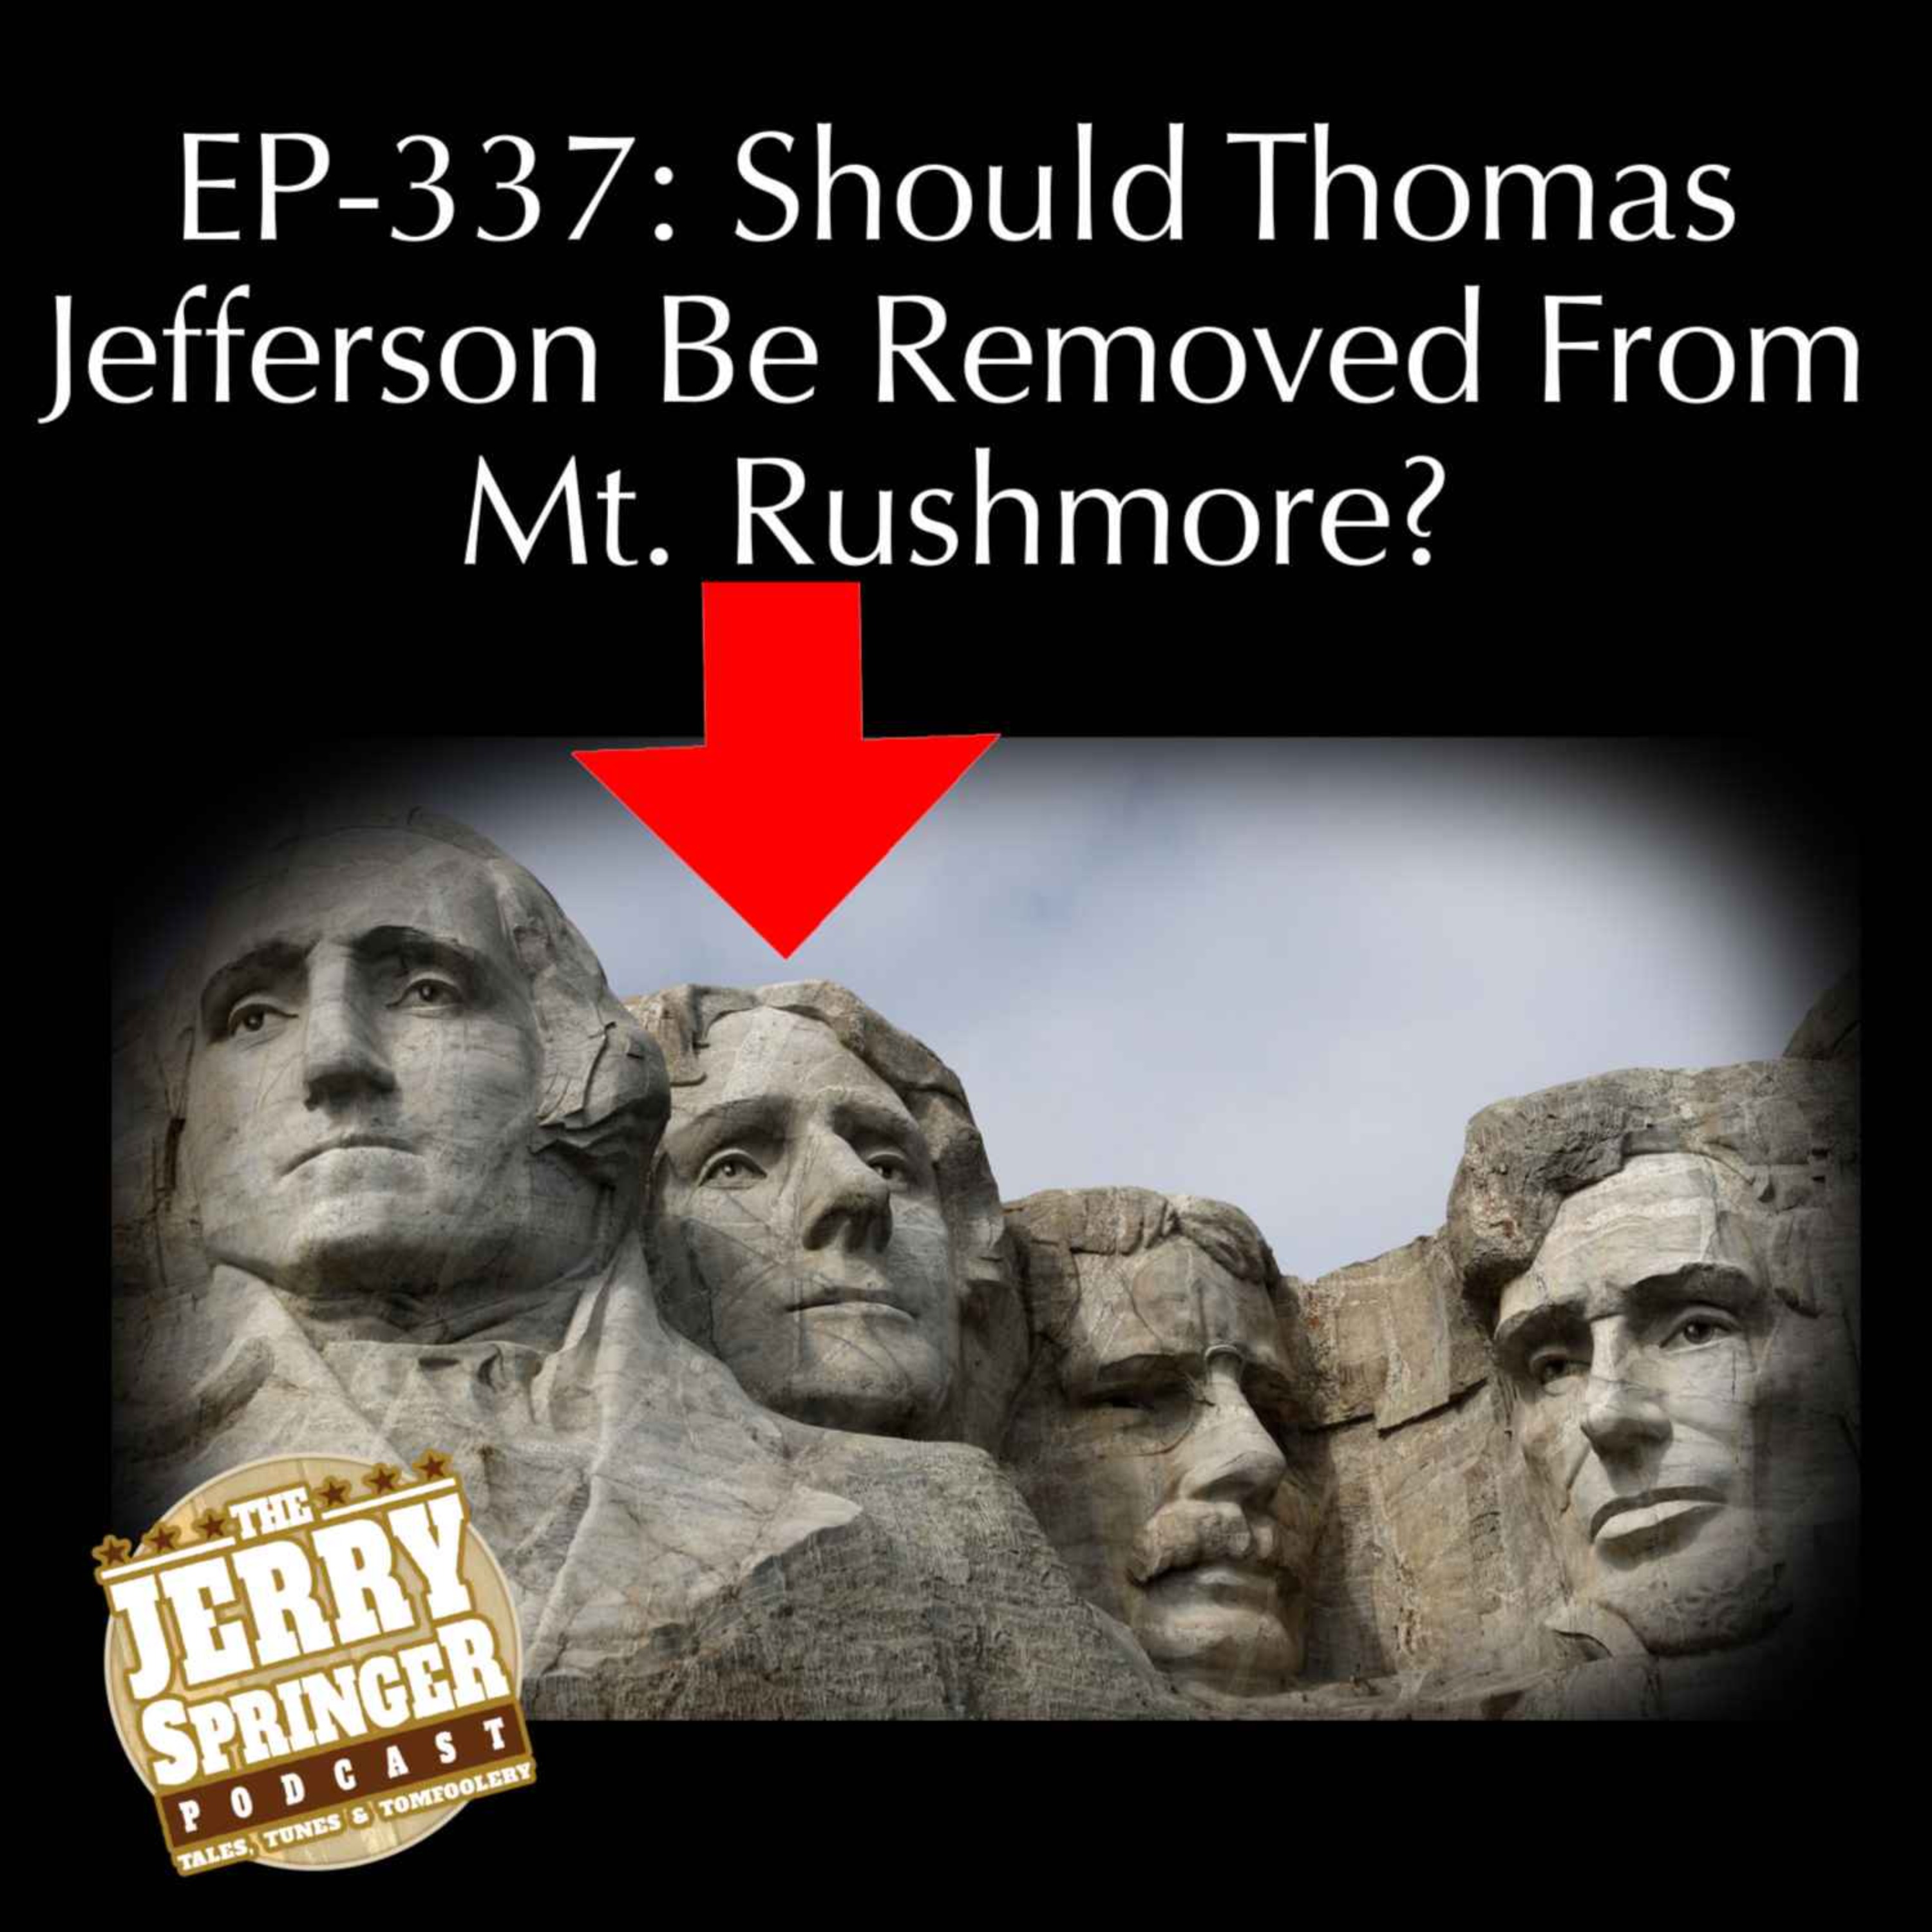 Should Thomas Jefferson Be Removed From Mt. Rushmore? EP-337